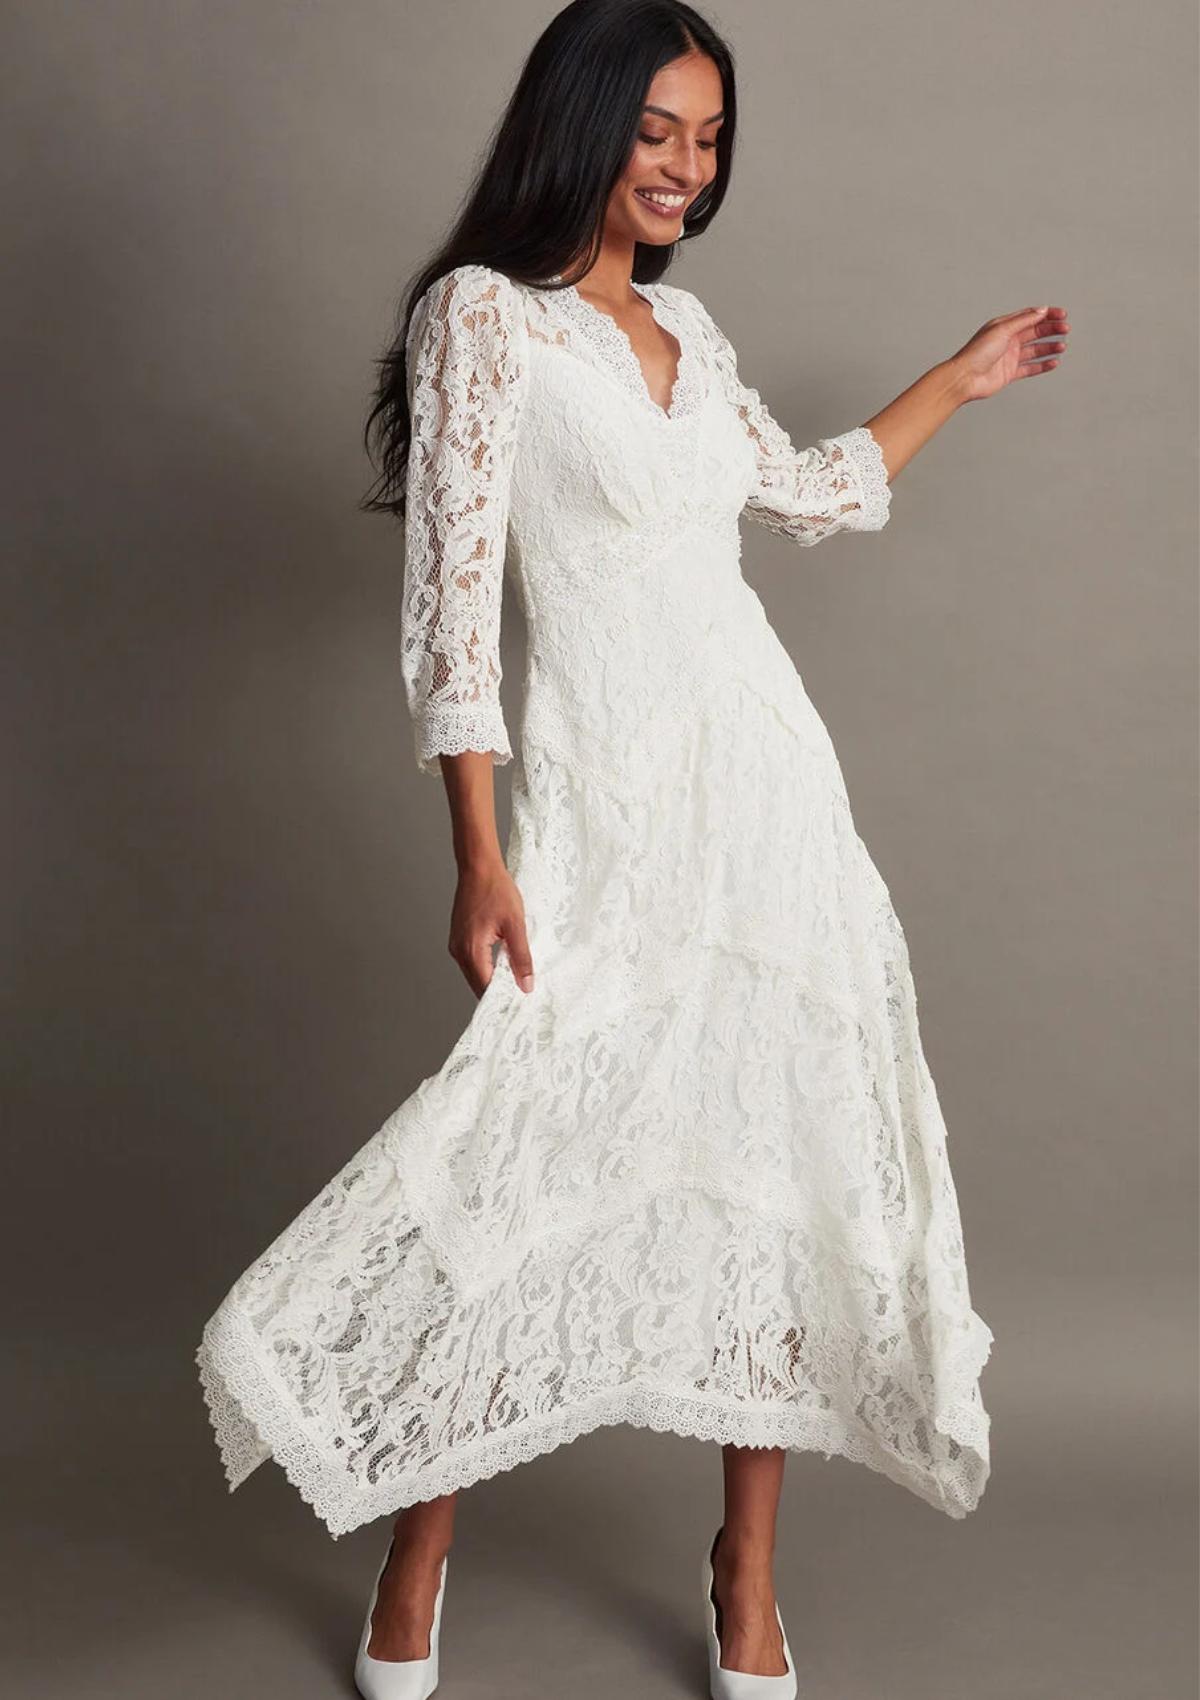 25 of the Best Casual Wedding Dresses - hitched.co.uk